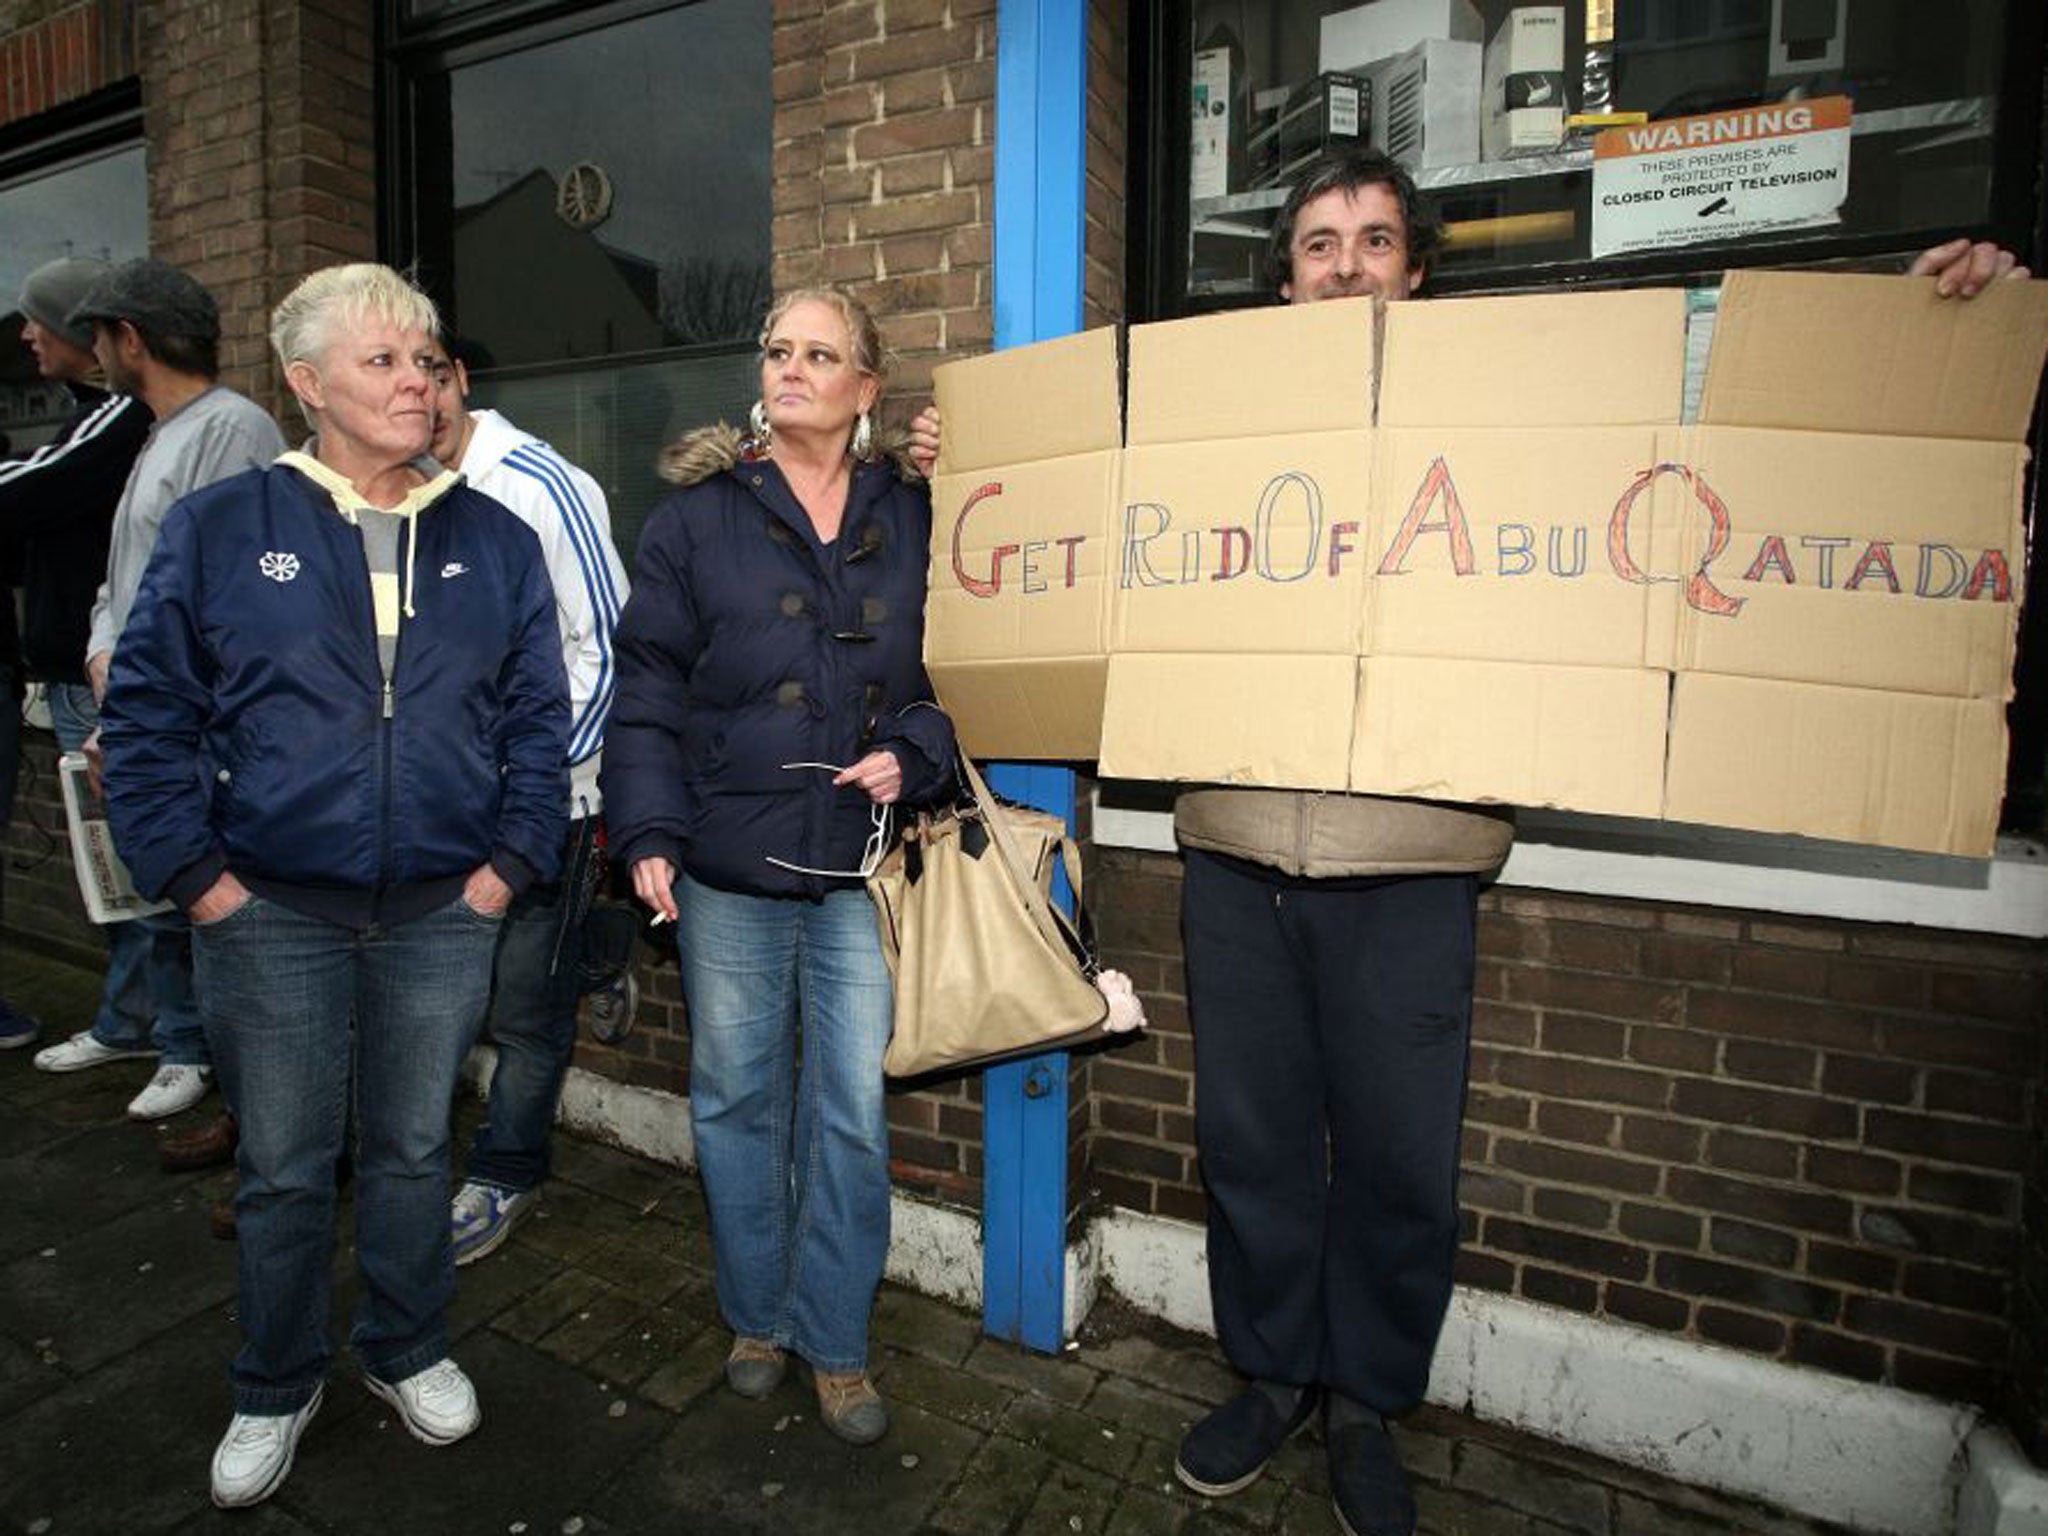 Protesters outside Abu Qatada’s home in Wembley after his release from prison this week